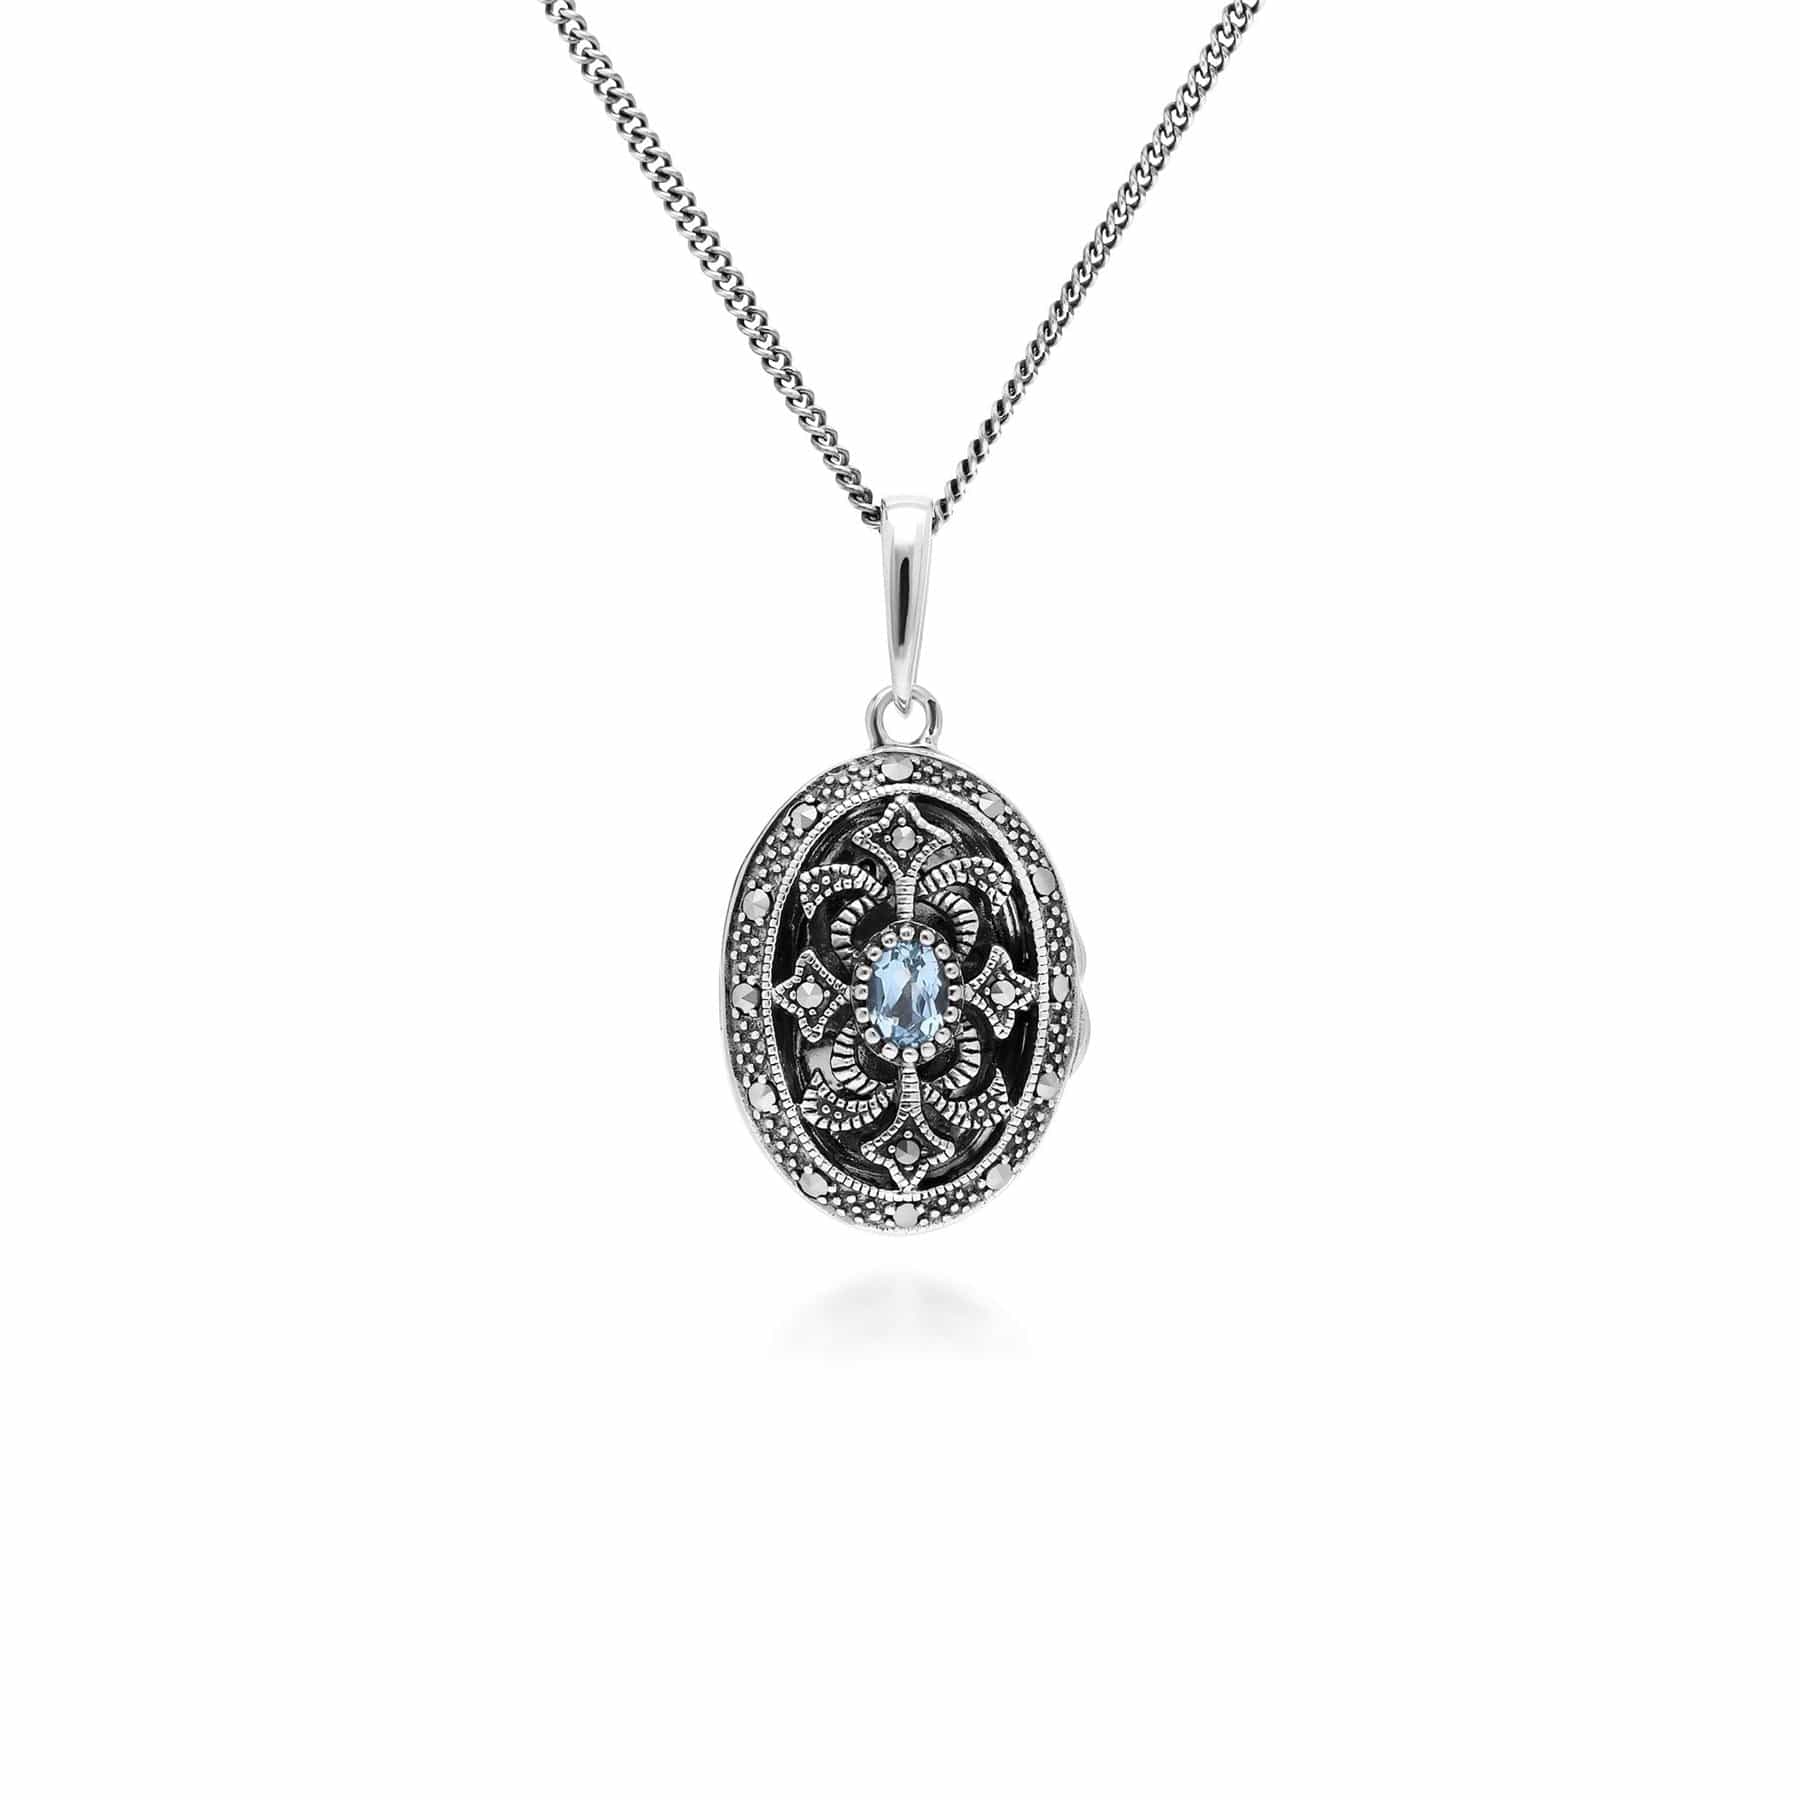 Image of Art Nouveau Style Oval Aquamarine & Marcasite Locket Necklace in 925 Sterling Silver